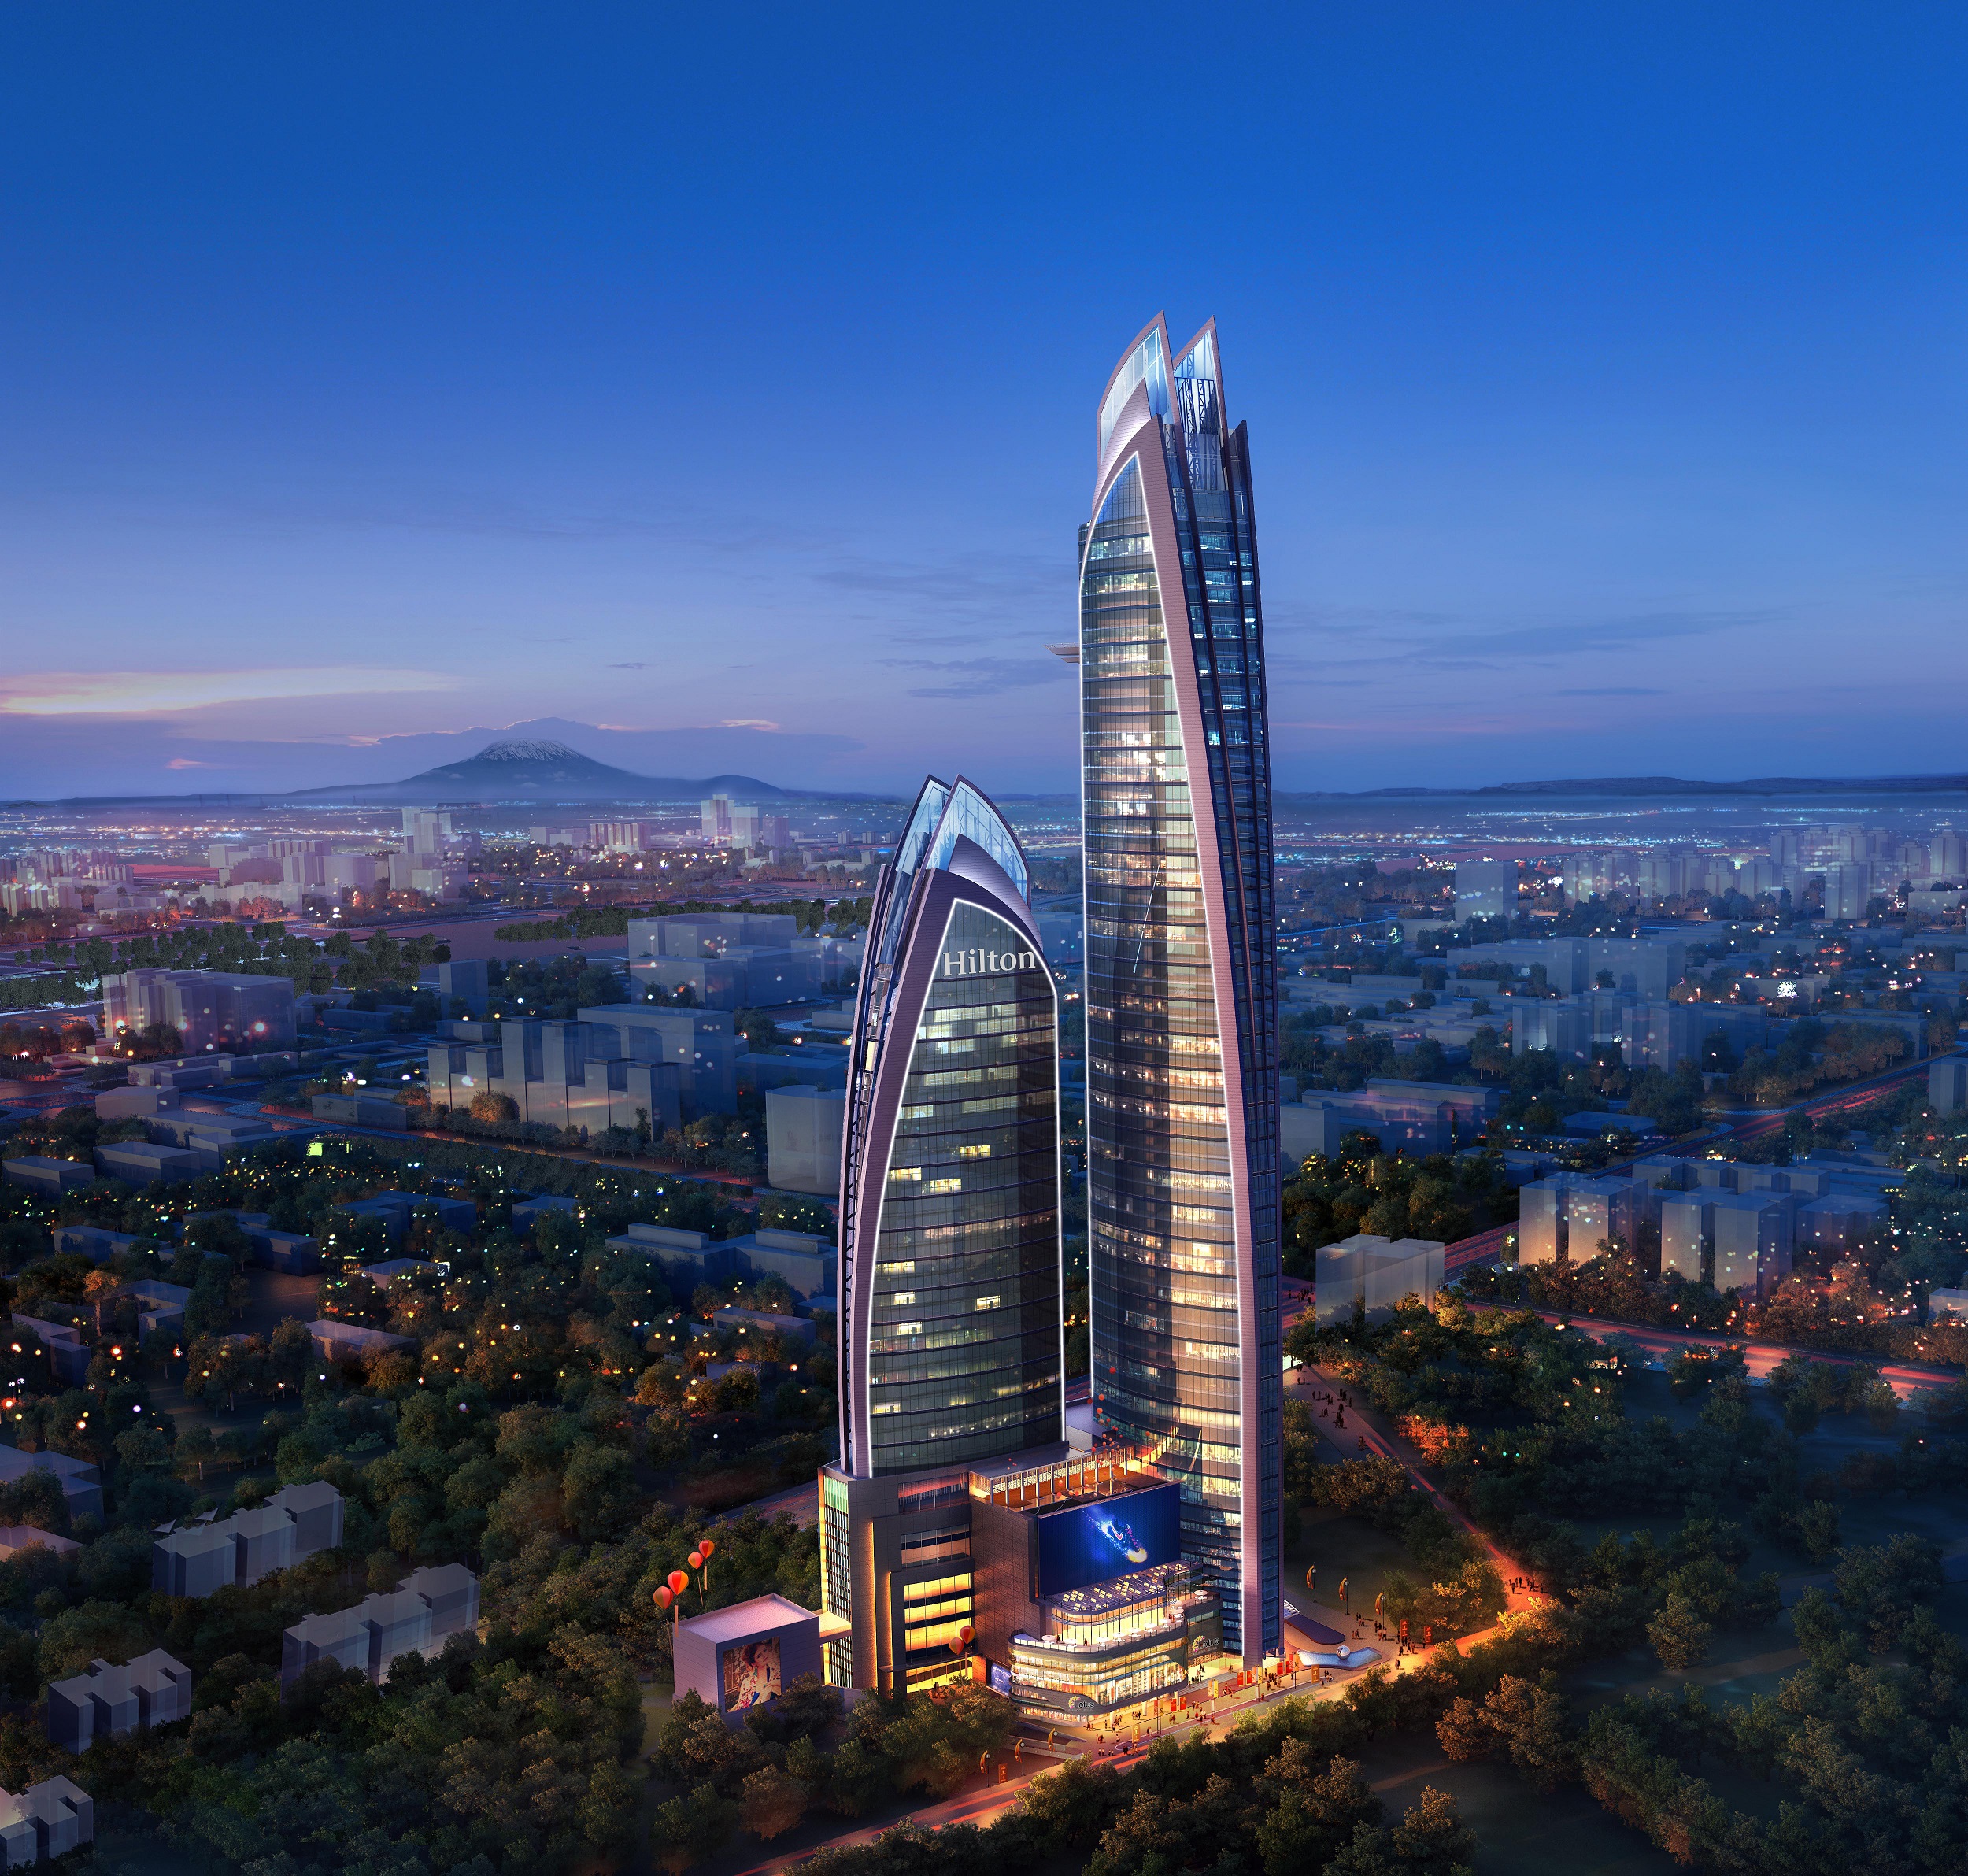 An image of Hass Towers, that will be the tallest building in Africa once construction is complete. The building is expected to be ready for occupation in 2020.